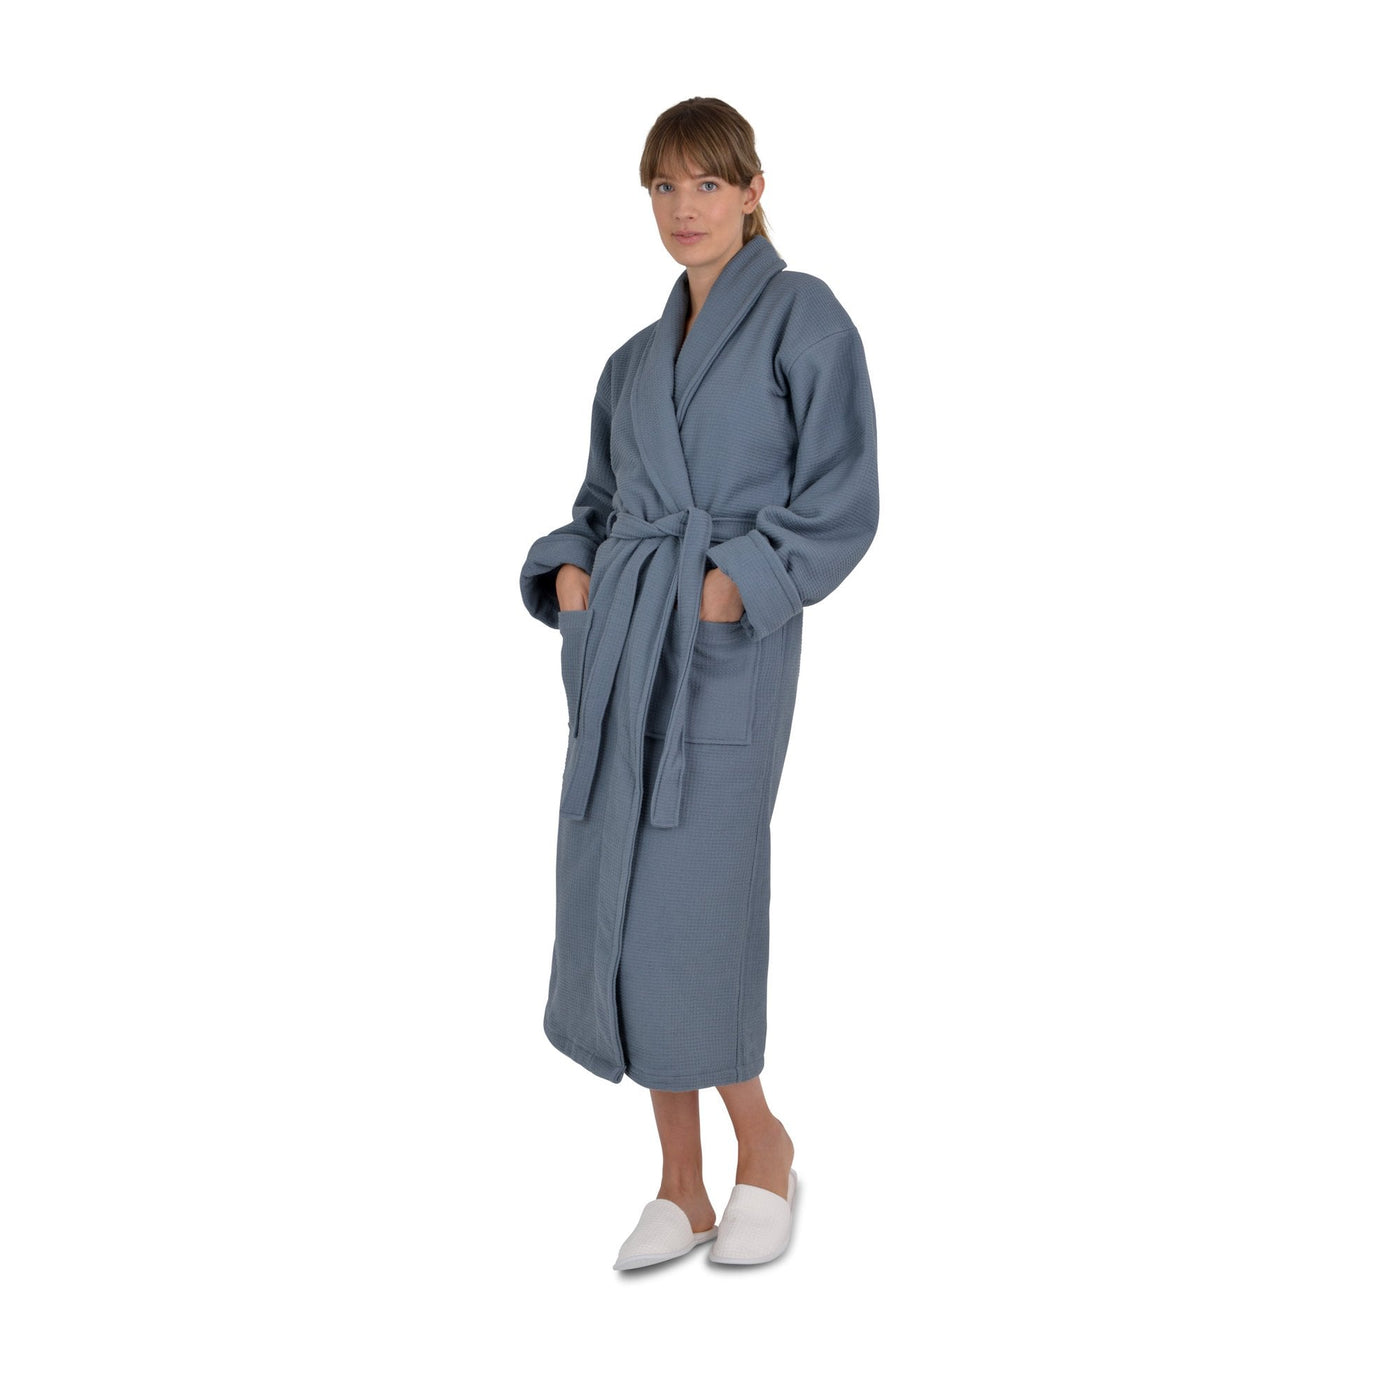 Palermo Cotton Waffle Lined Bath Robe Dressing Gown White Green Navy Grey –  The Fine Cotton Company